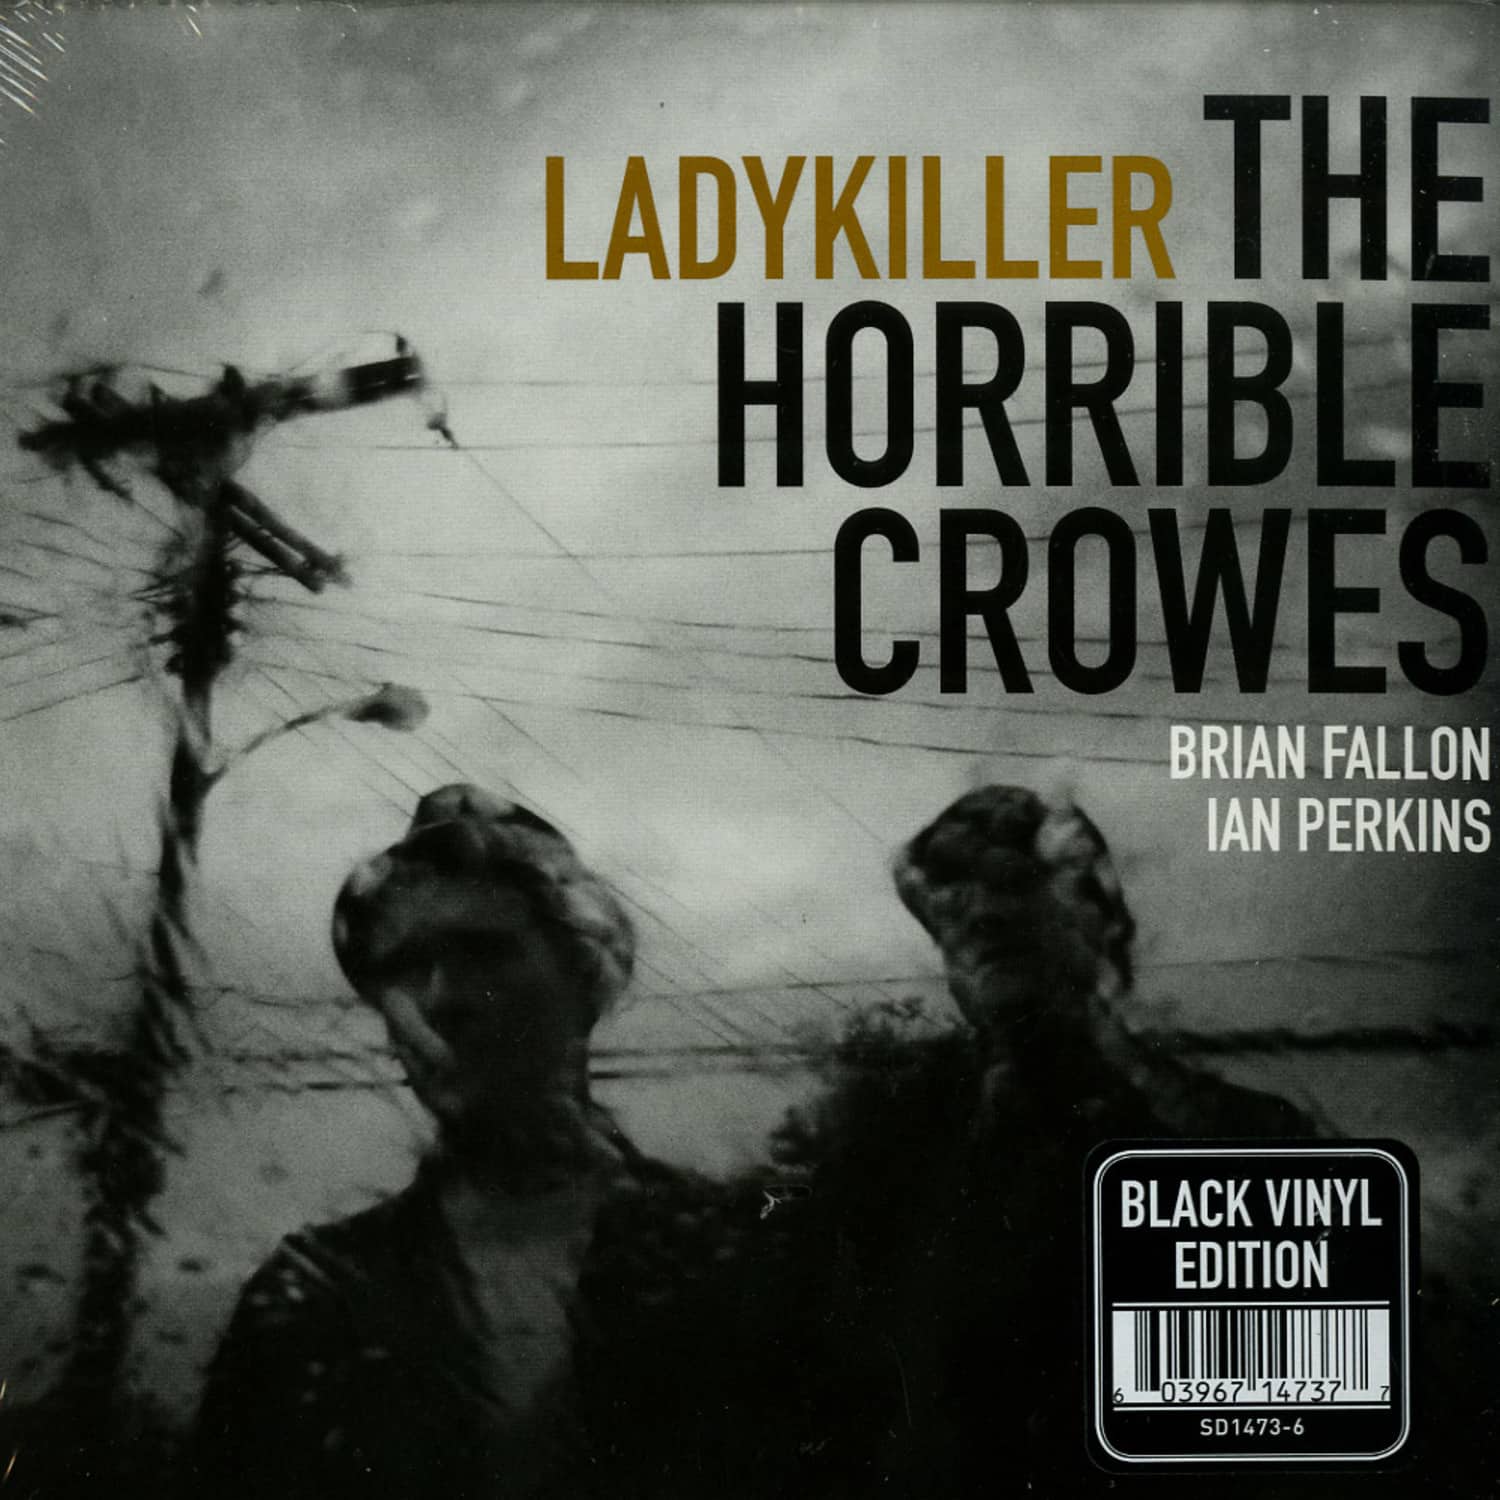 The Horrible Crowes - LADYKILLER / NEVER TEAR US APART 